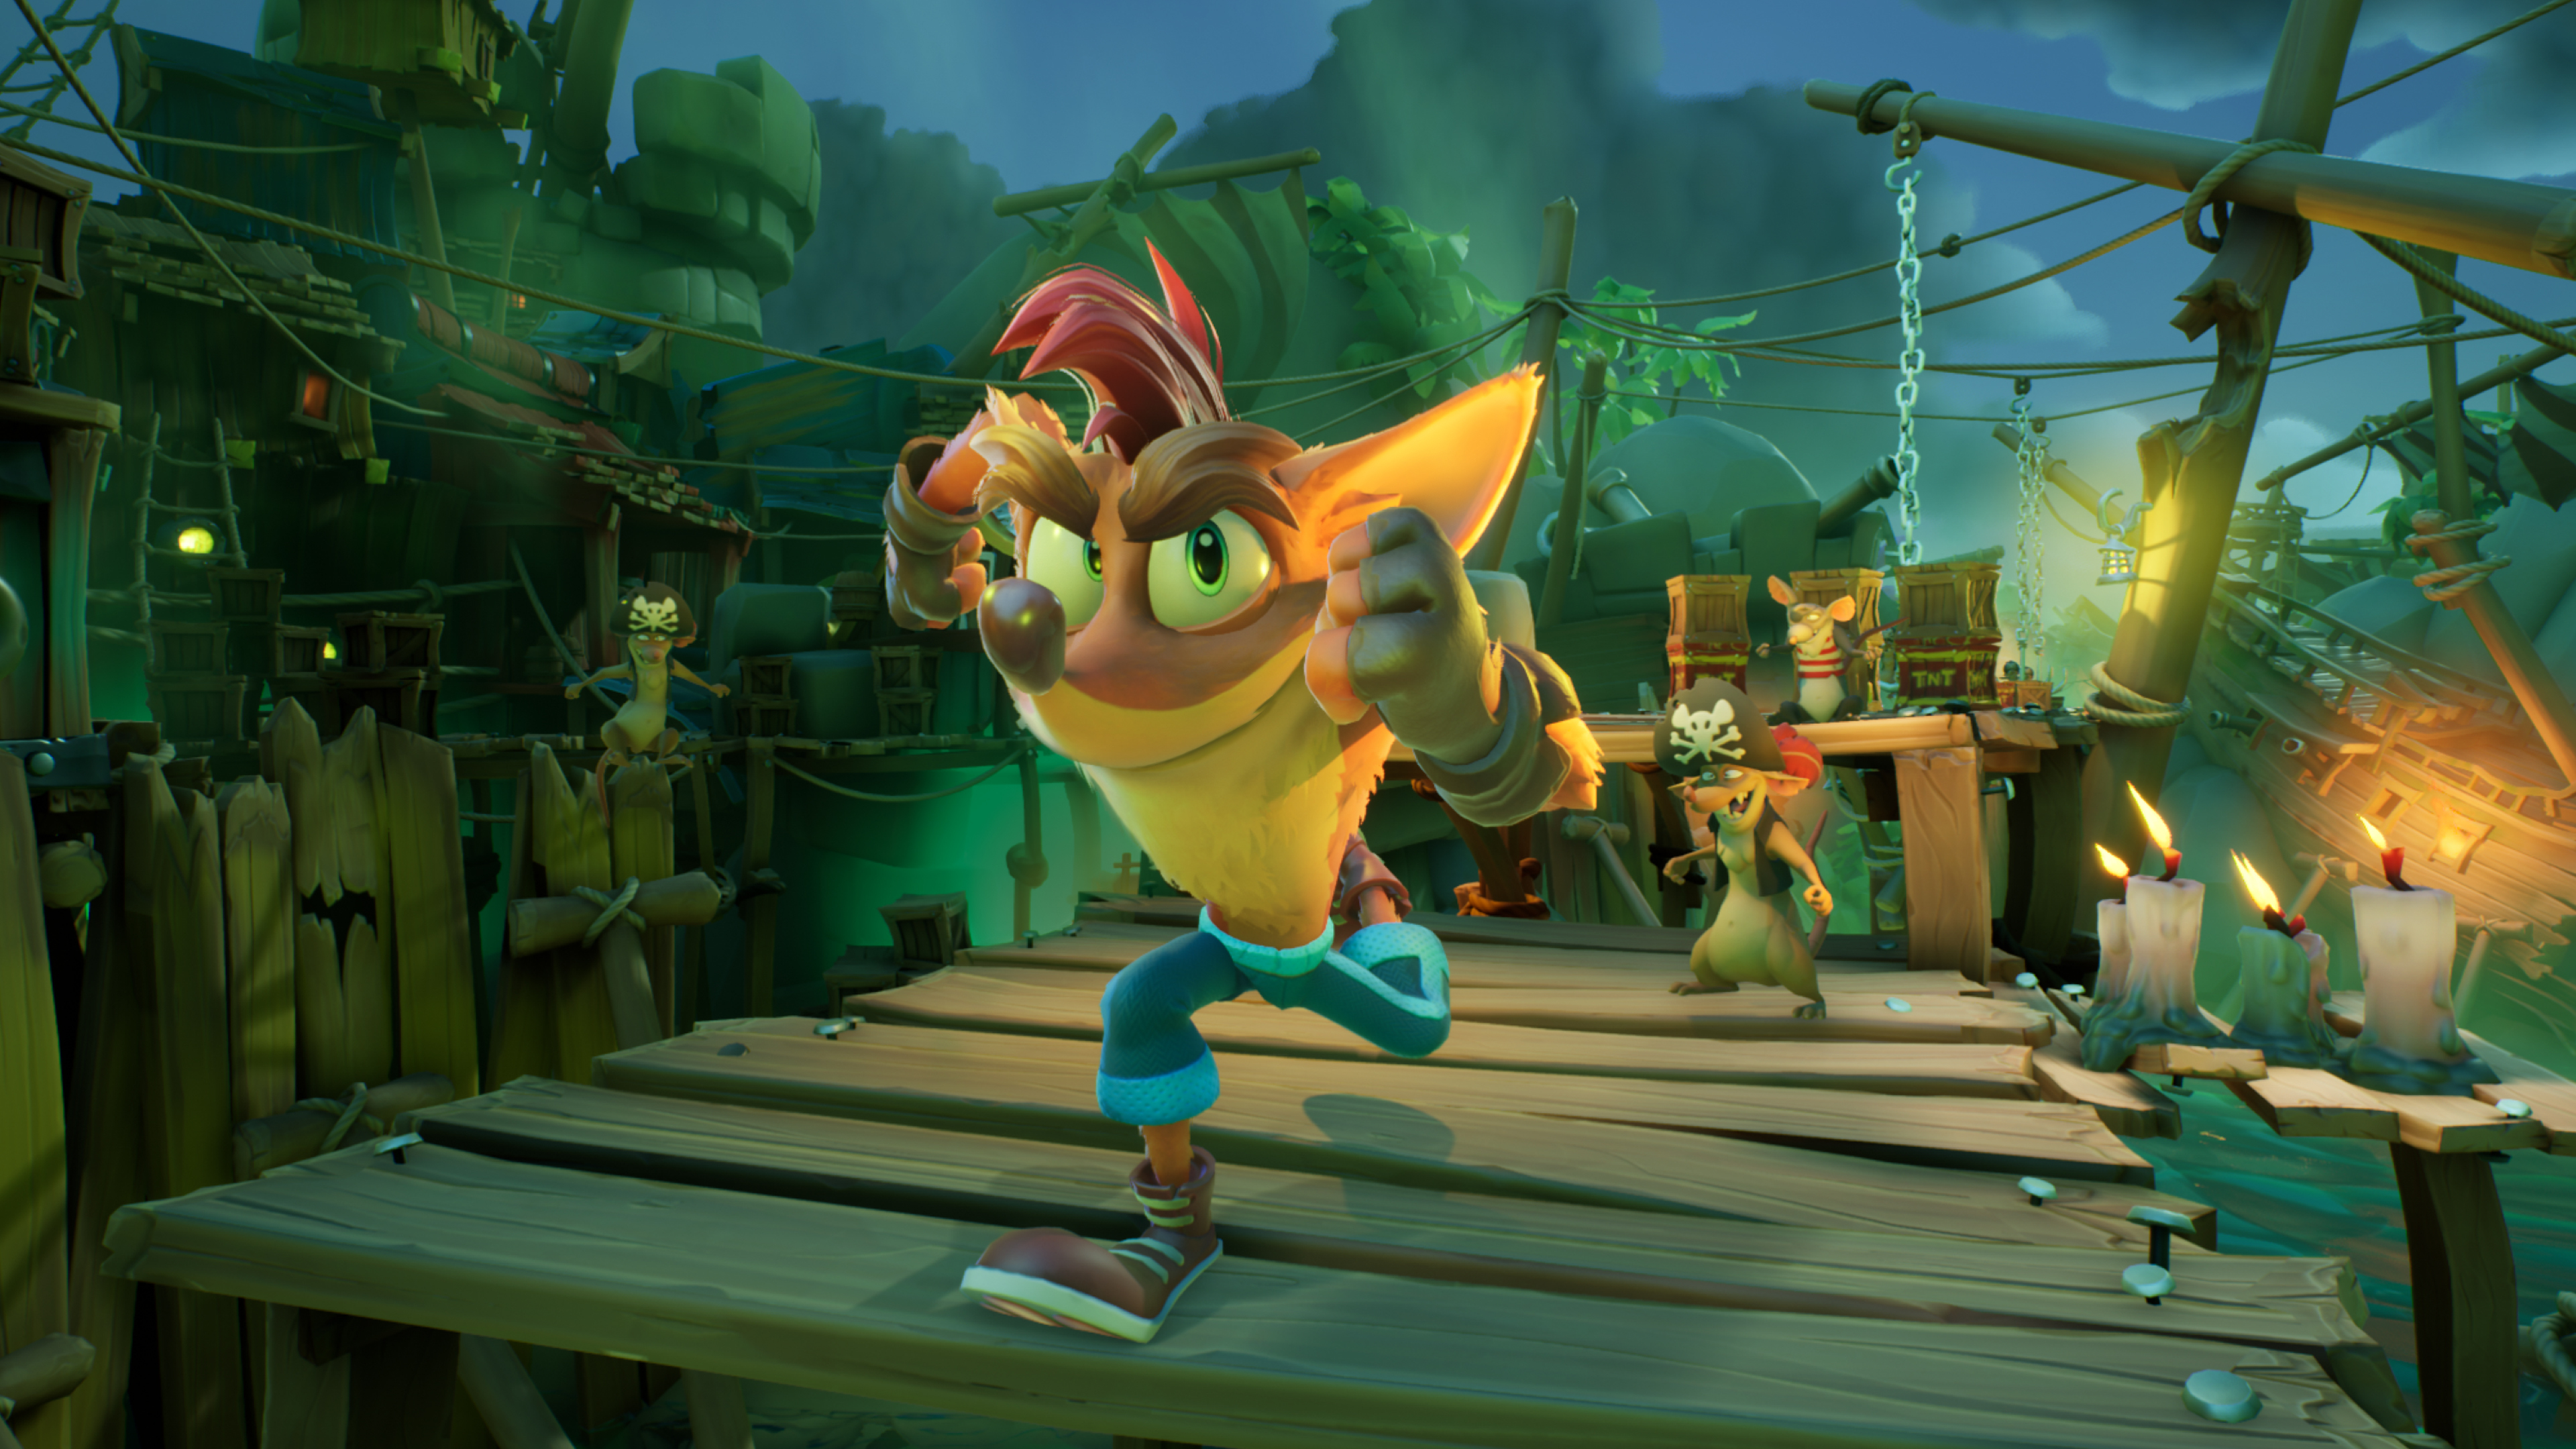 knoglebrud Lim Aktiver Crash Bandicoot Makes His Way Four-Ward to Next-Gen Consoles, Switch, and PC  in 2021! | Business Wire